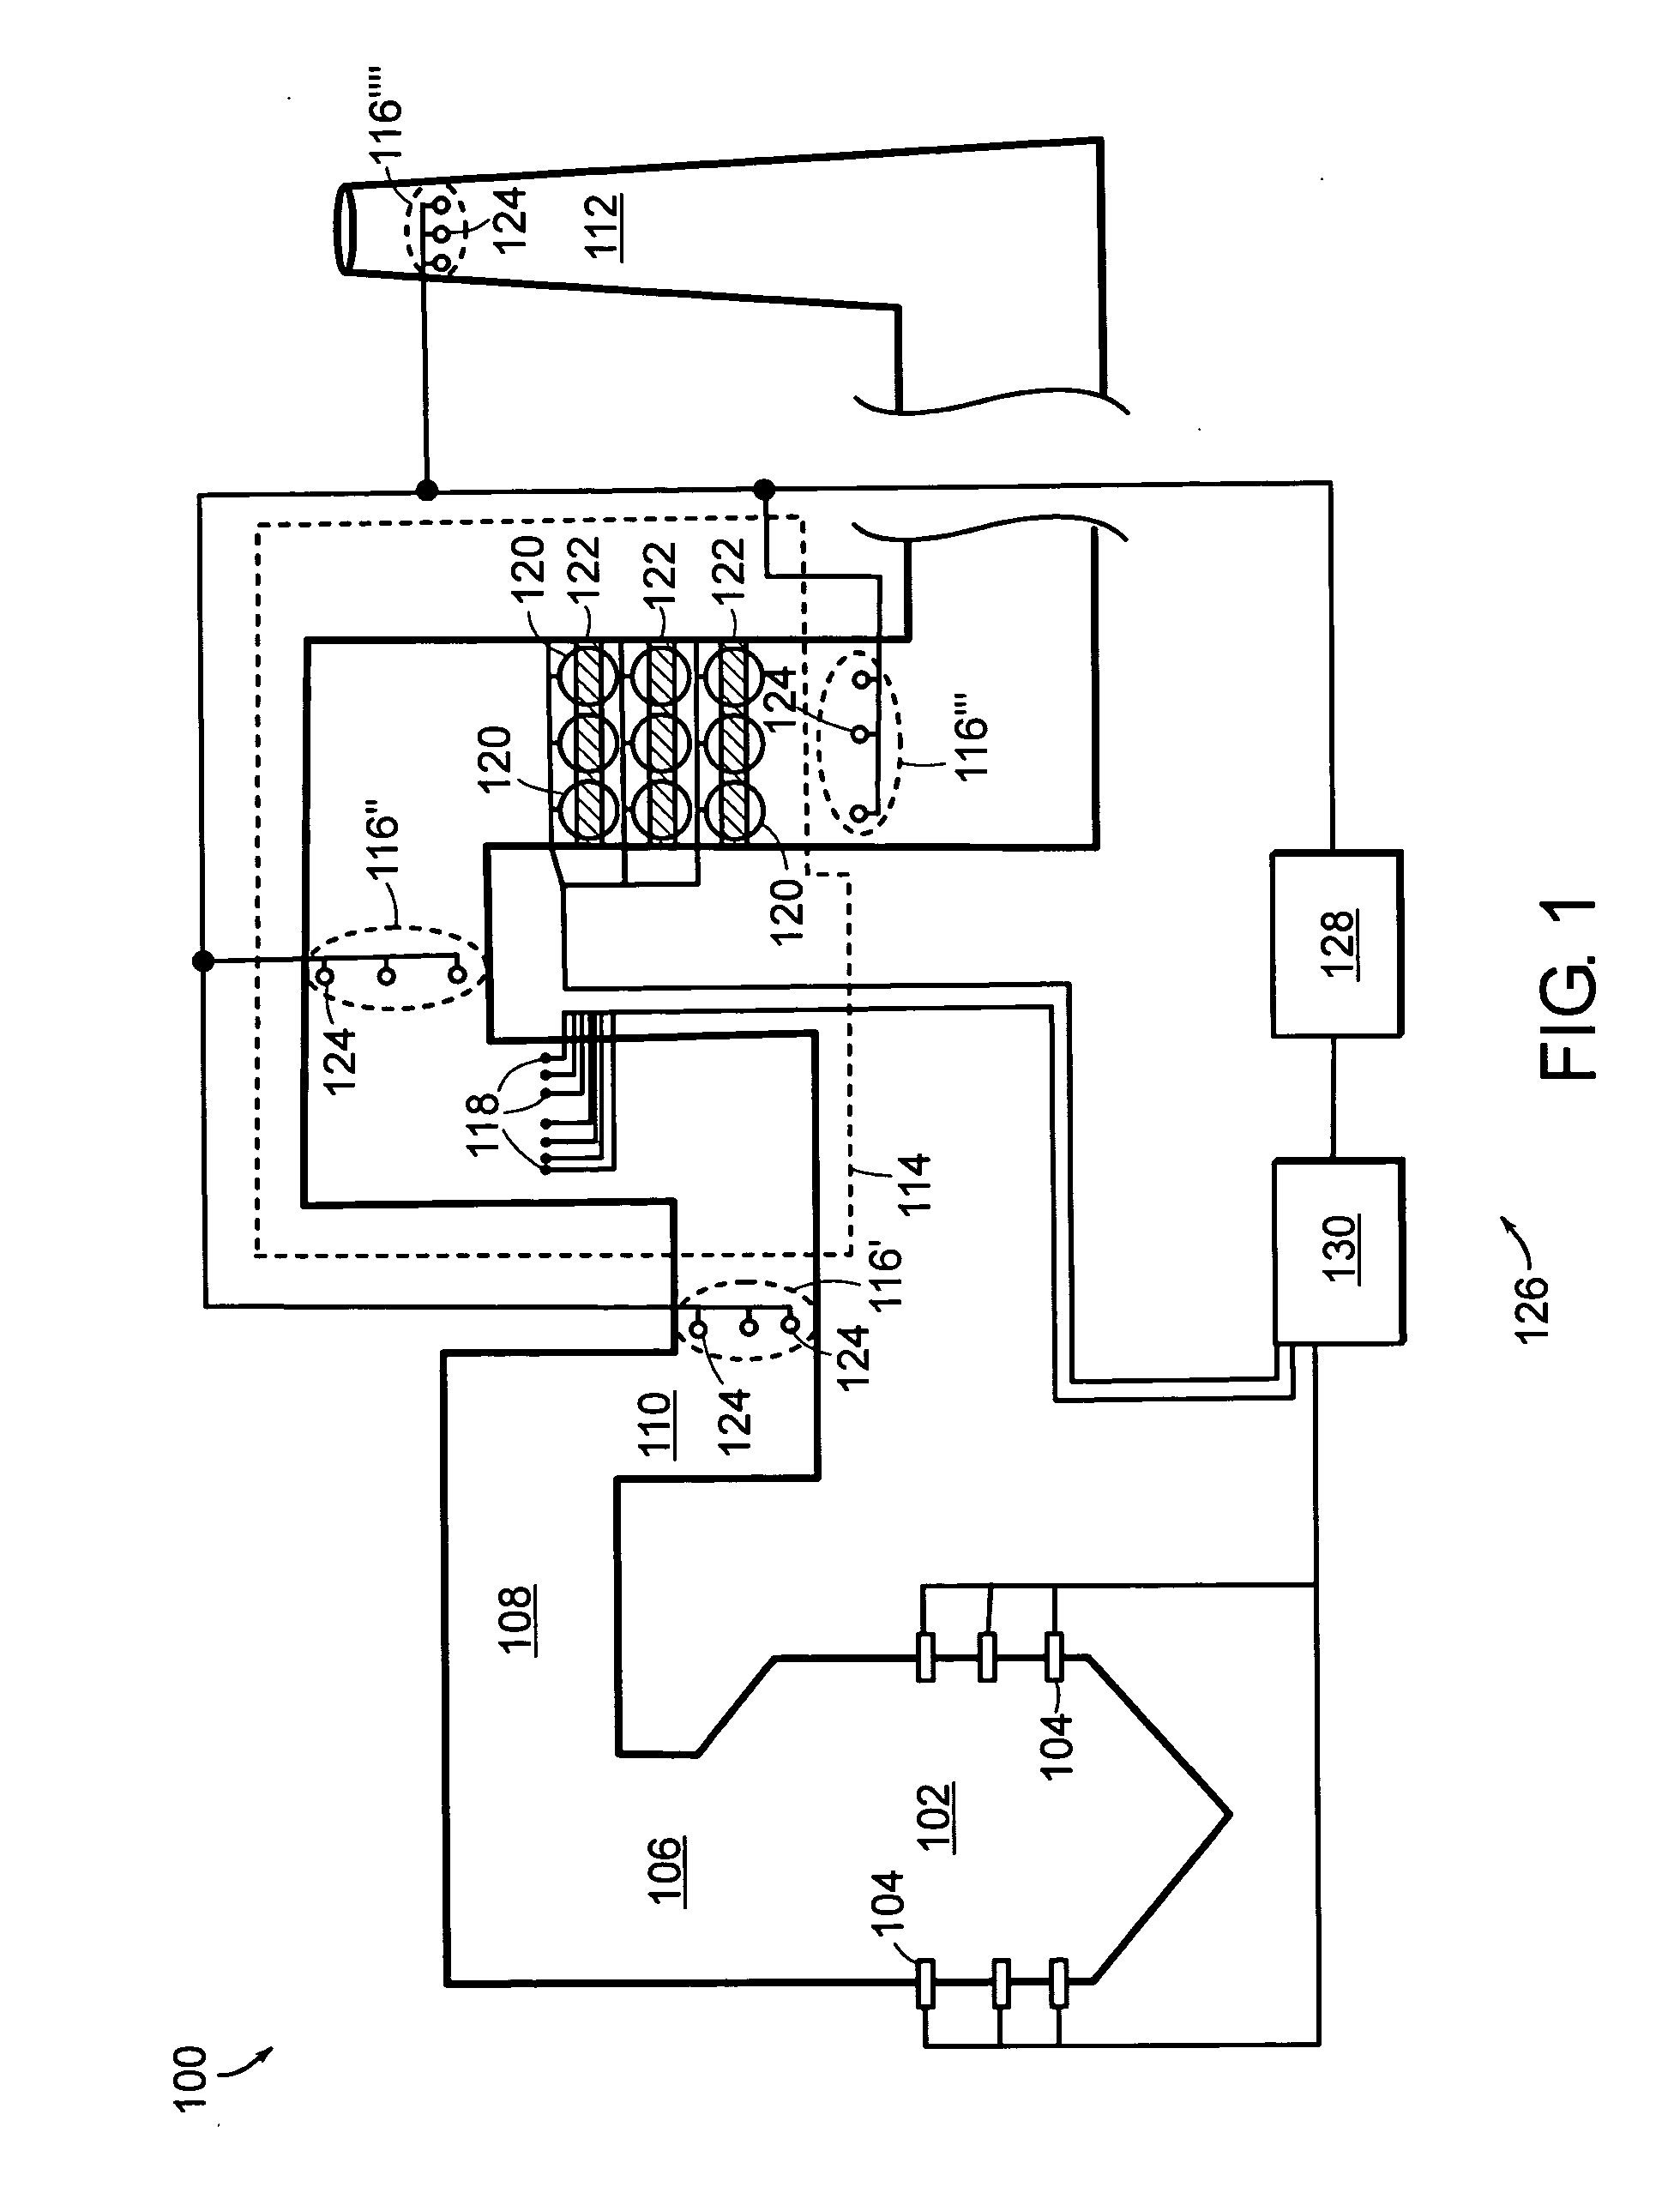 Method and system for SCR Optimization